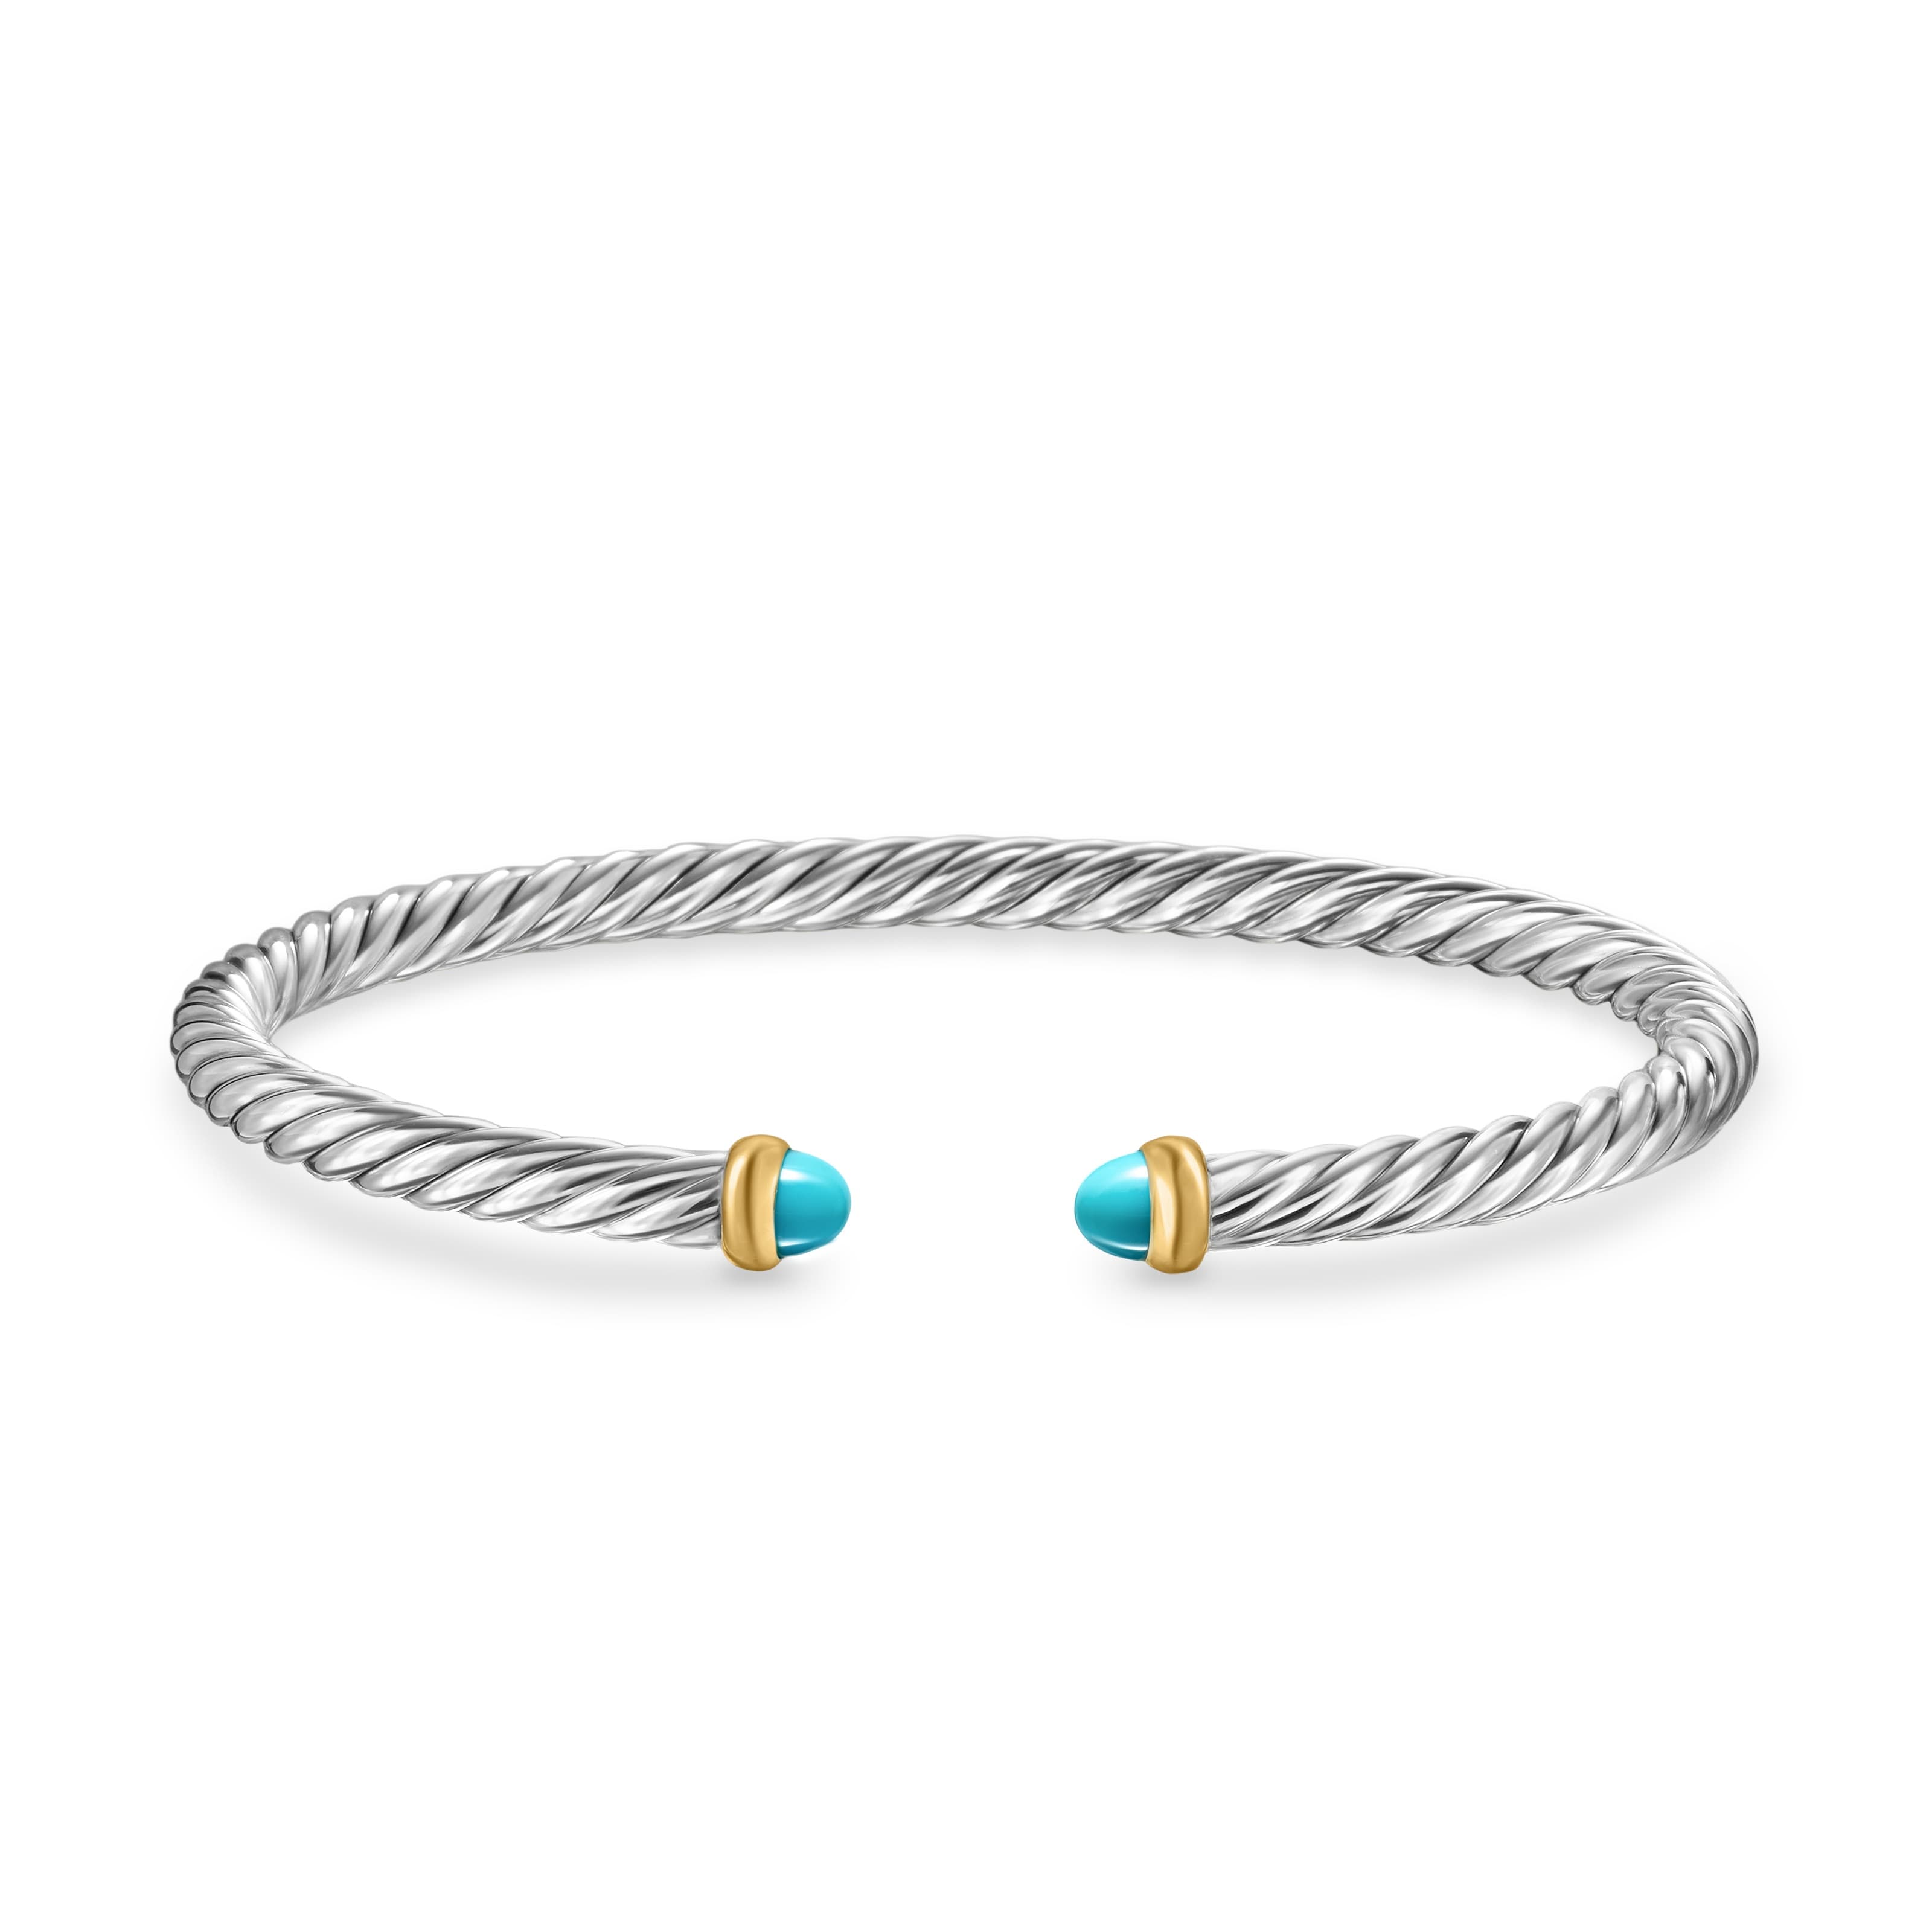 David Yurman Cable Flex Sterling Silver Bracelet with Turquoise, Size Medium 2